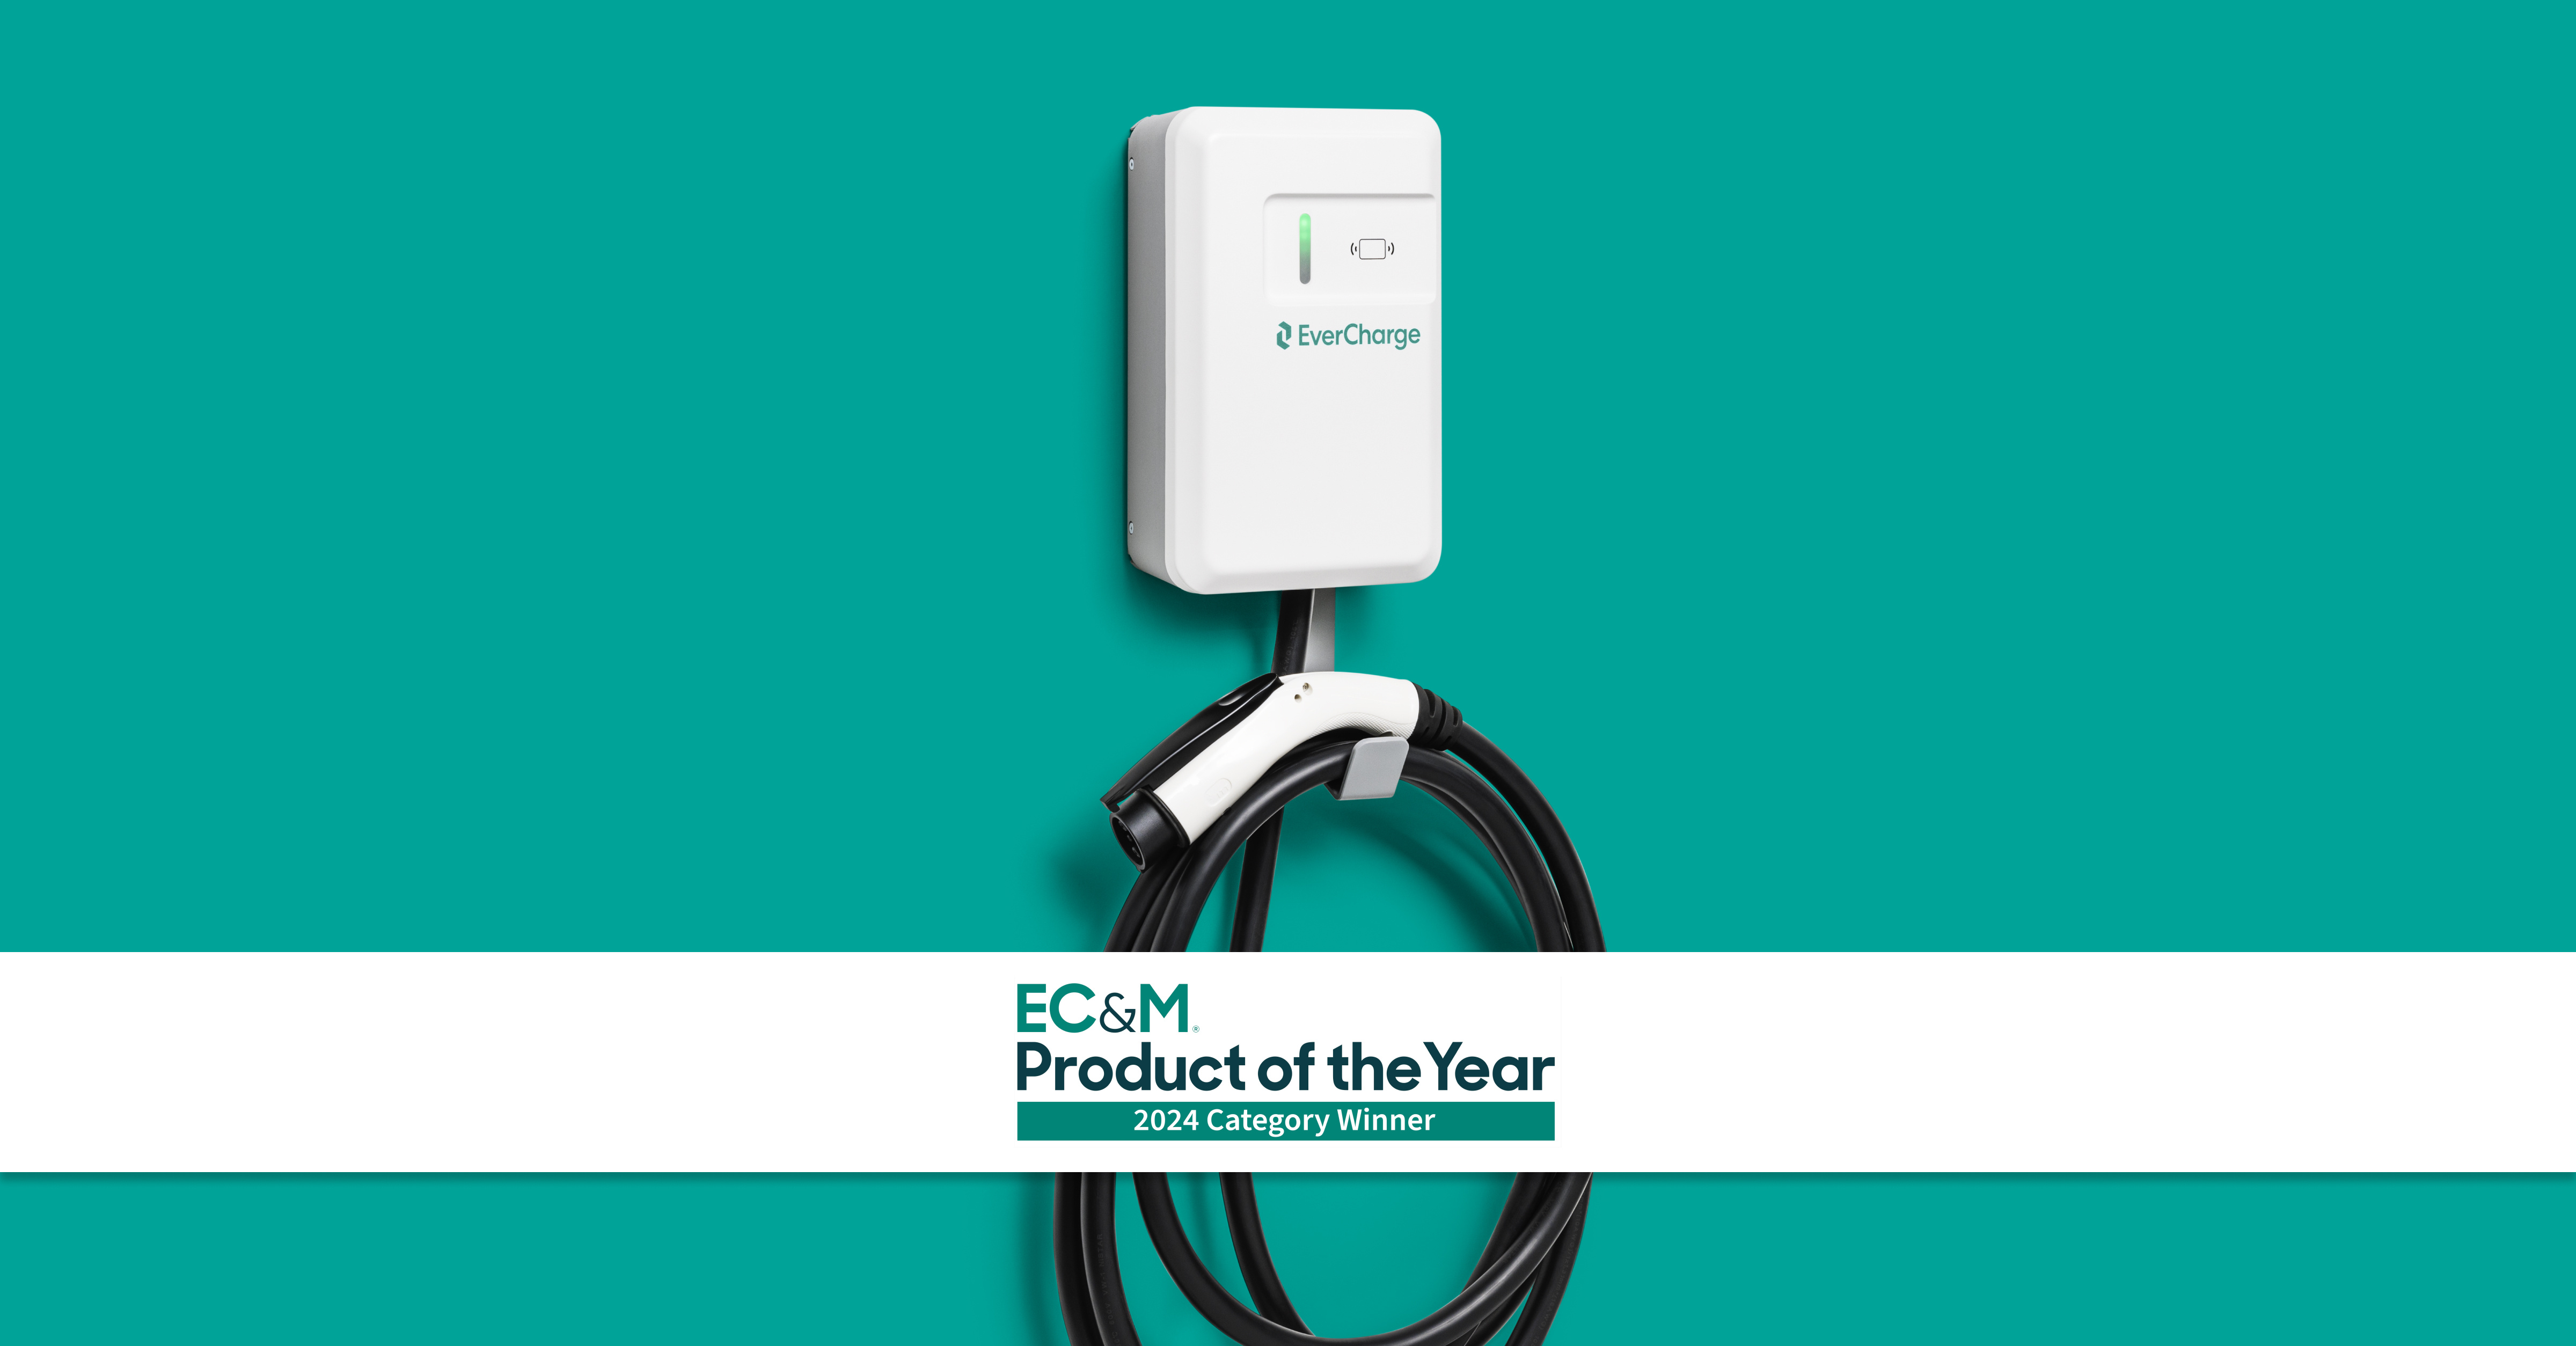 EverCharge Wins Product of the Year by EC&M